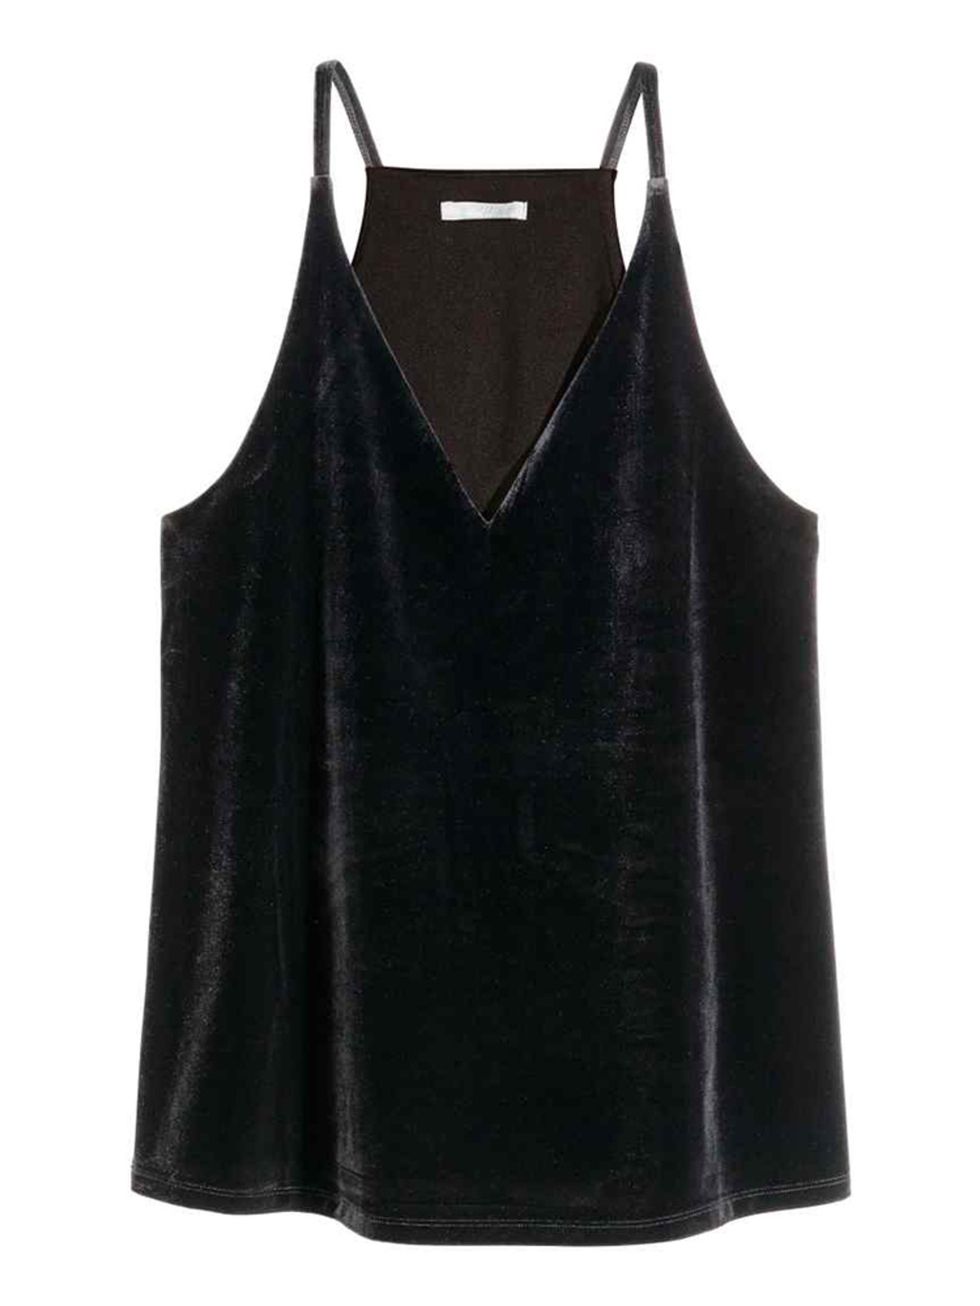 How to layer with a velvet tank top